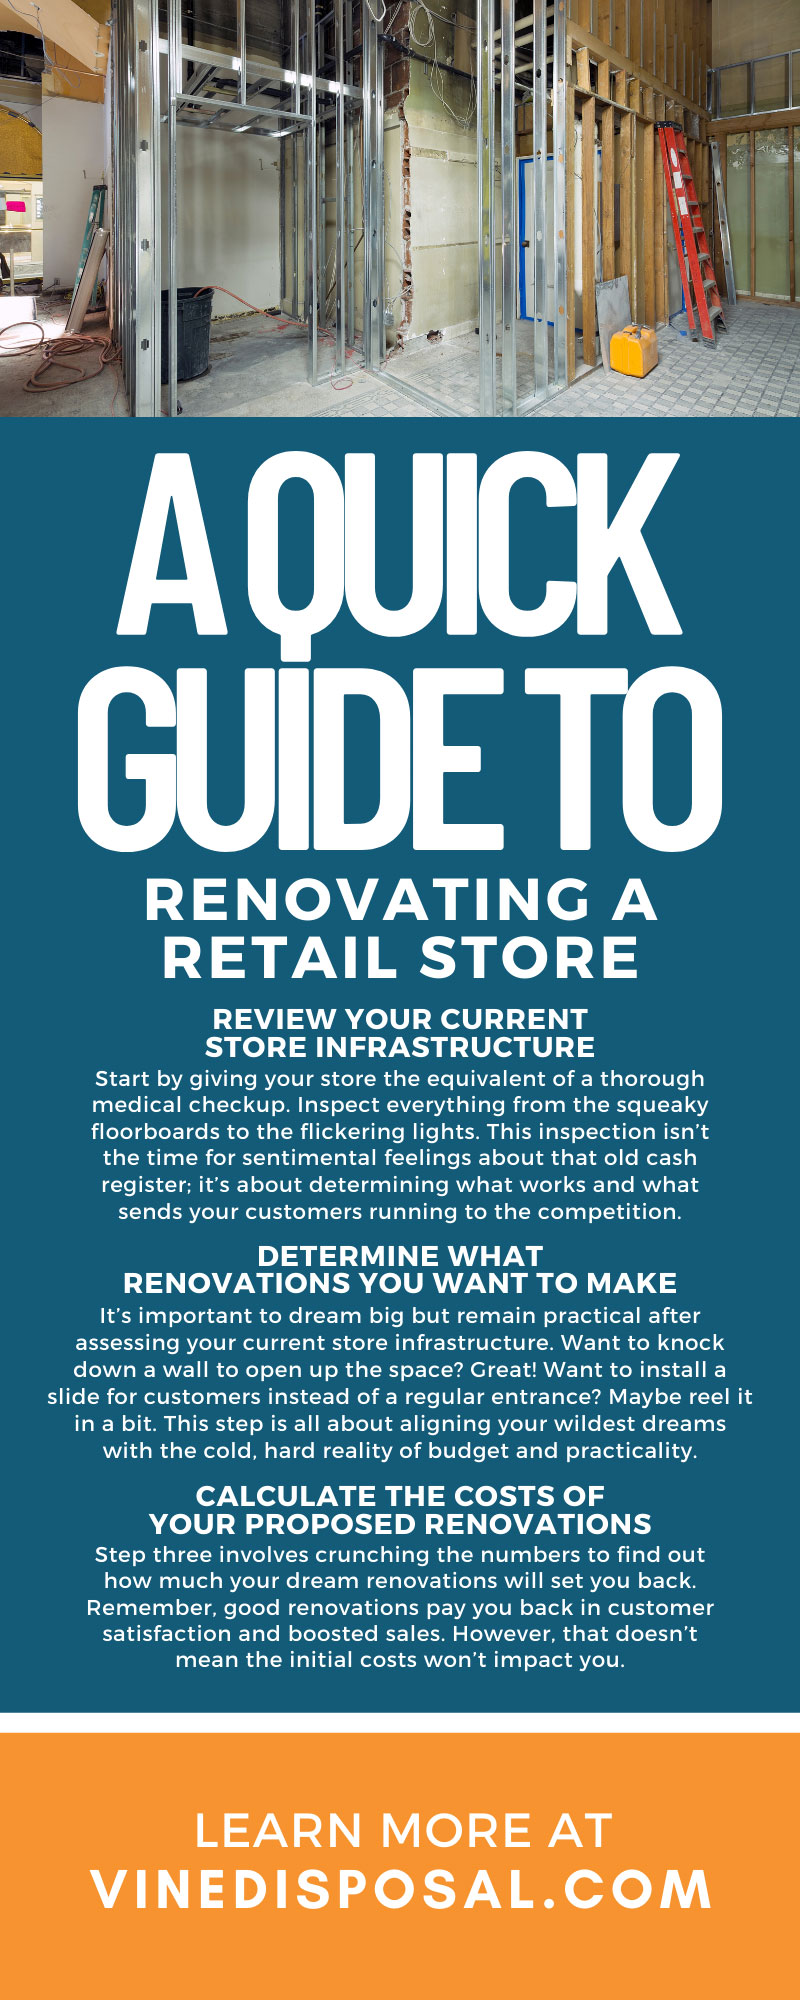 A Quick Guide to Renovating a Retail Store